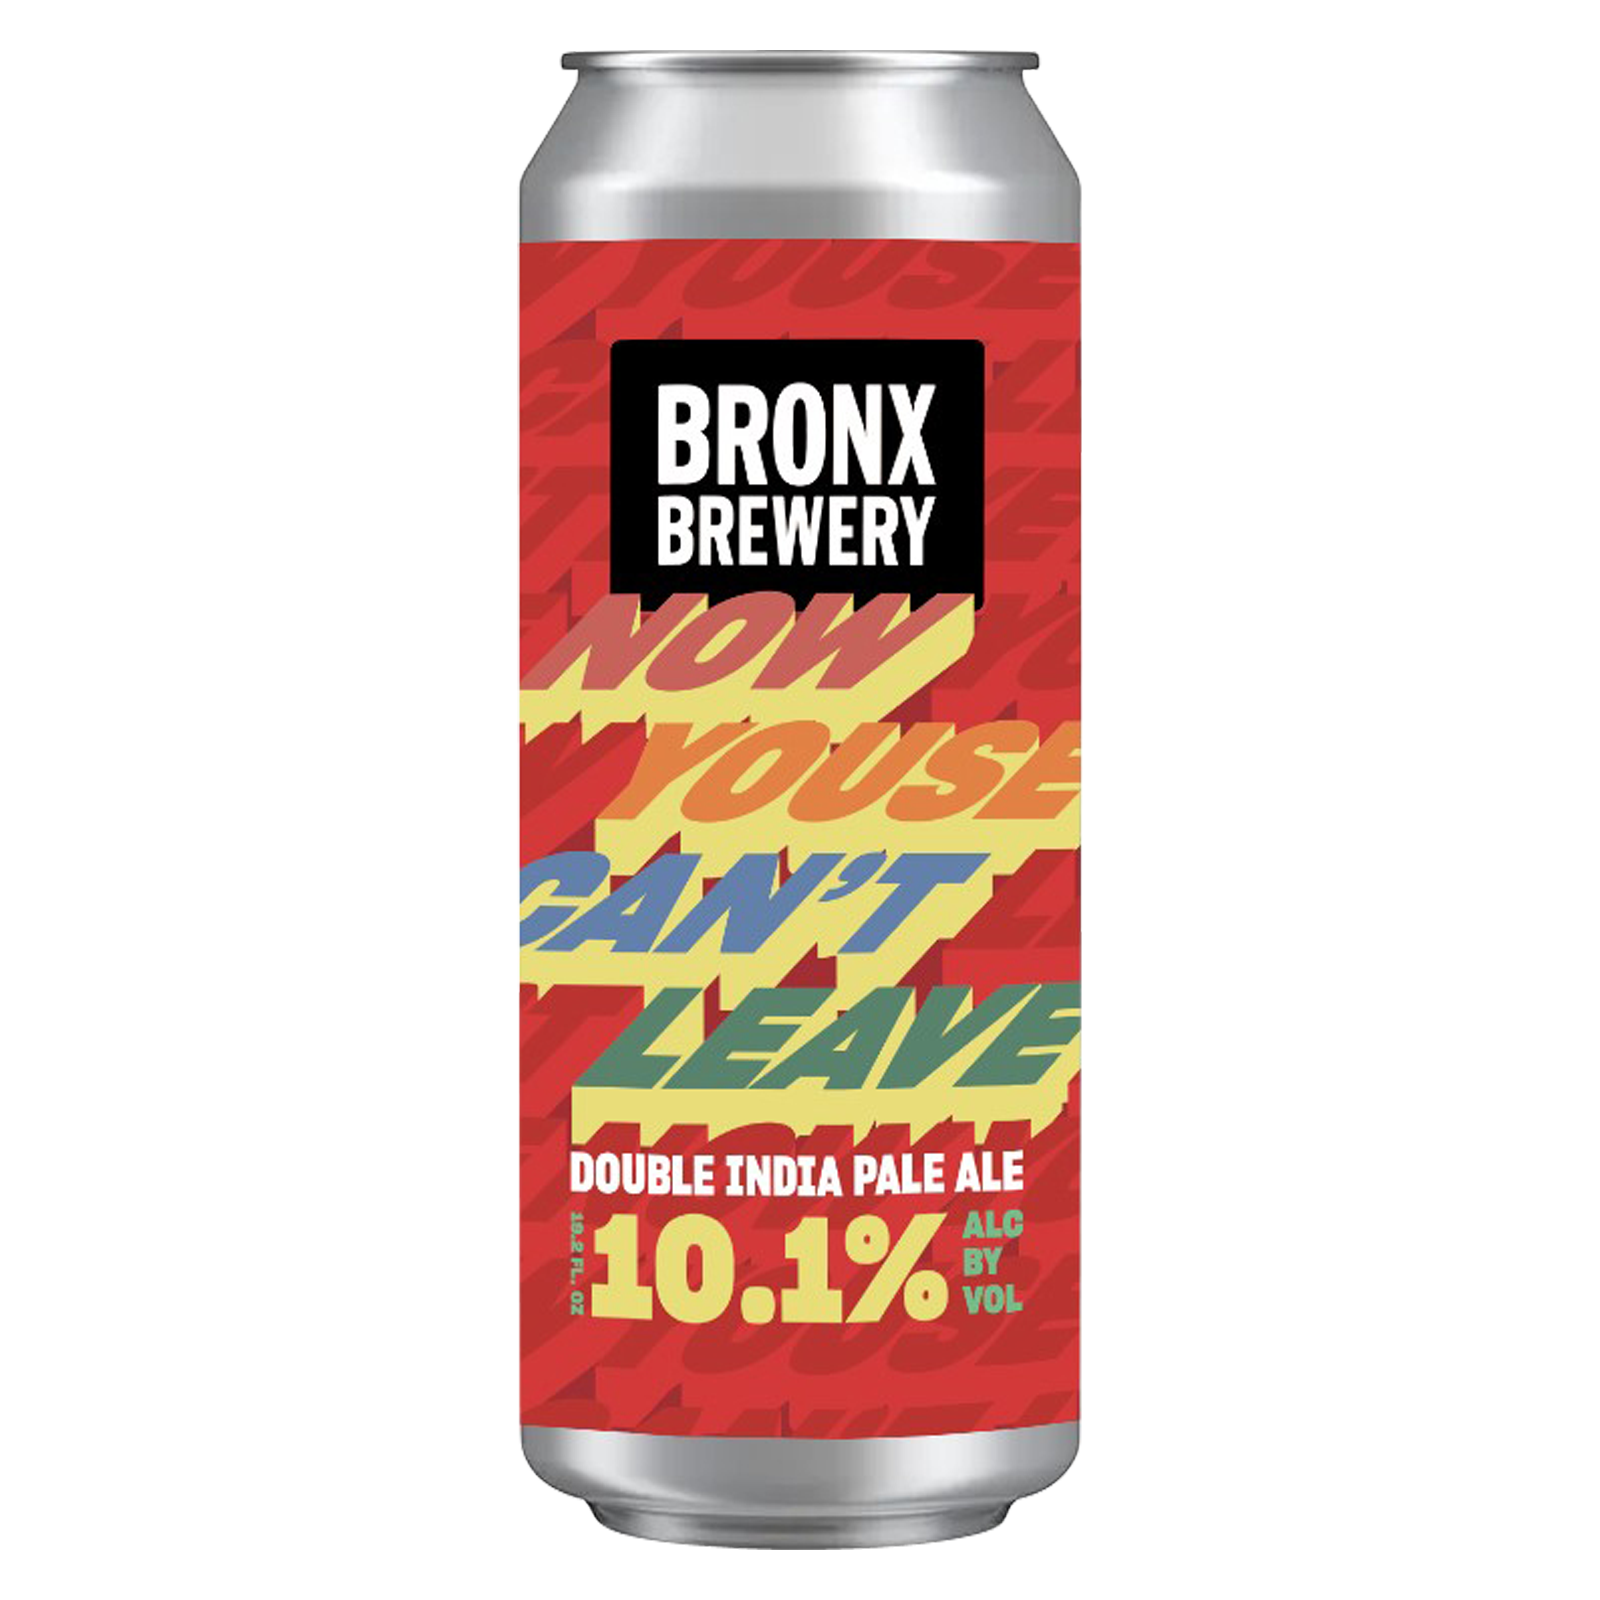 Bronx Brewery Now Youse Can't leave Single 19.2oz Can 10.1% ABV